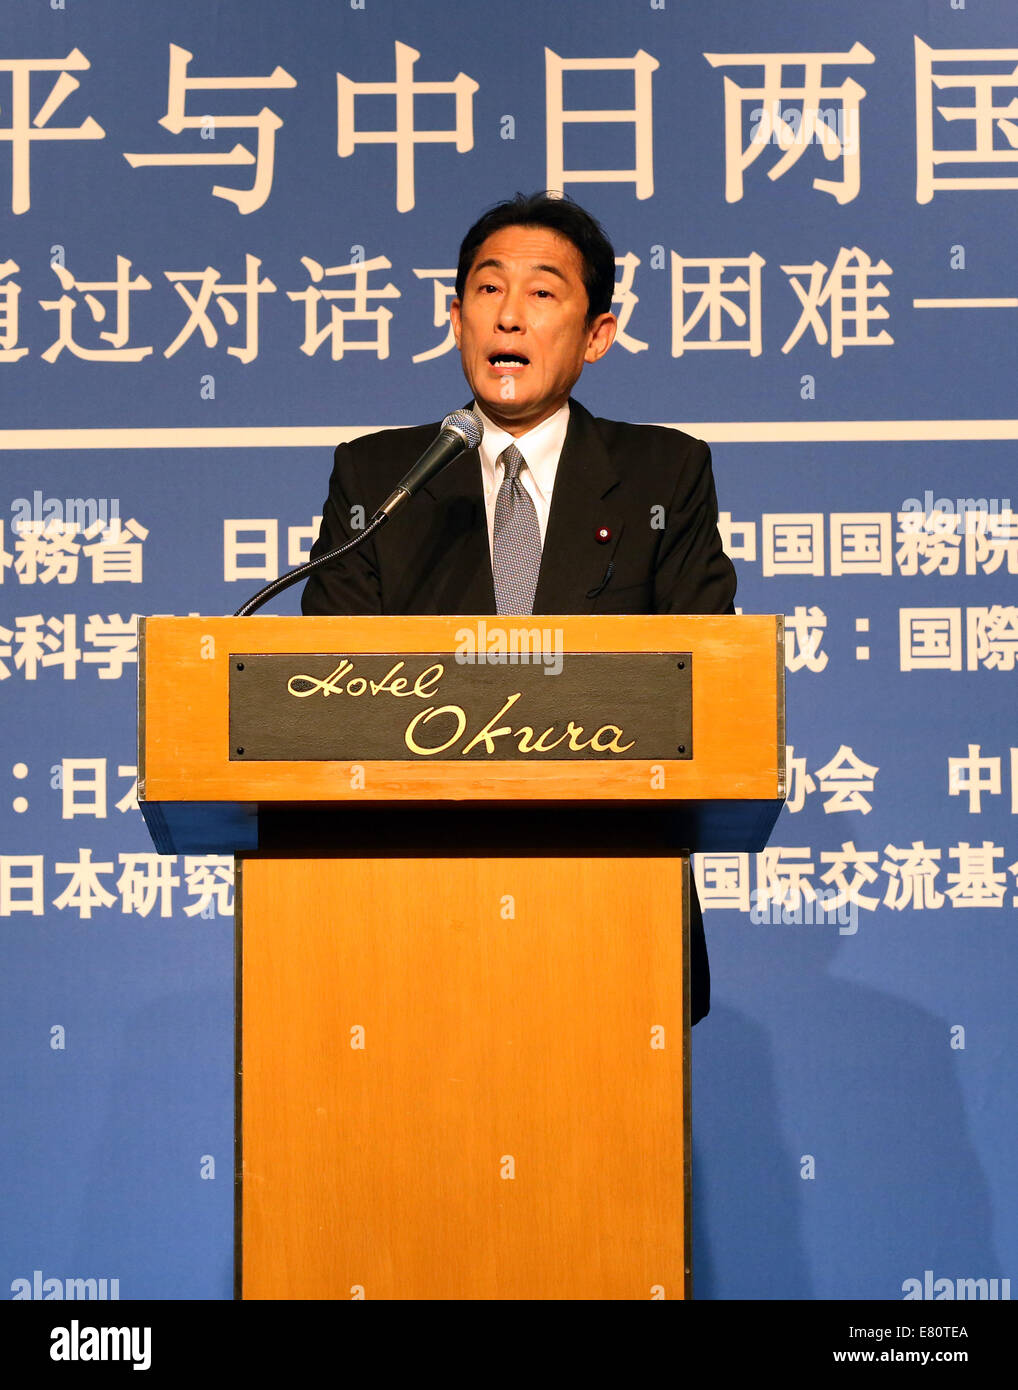 Tokyo, Japan. 28th Sep, 2014. Japanese Foreign Minister Fumio Kishida speaks during the opening ceremony of the 10th Beijing-Tokyo Forum in Tokyo, capital of Japan, Sept. 28, 2014. The forum, held annually since 2005, was jointly organized by China's biggest English newspaper, China Daily, and Genron NPO, a Japanese think tank. Credit:  Liu Tian/Xinhua/Alamy Live News Stock Photo